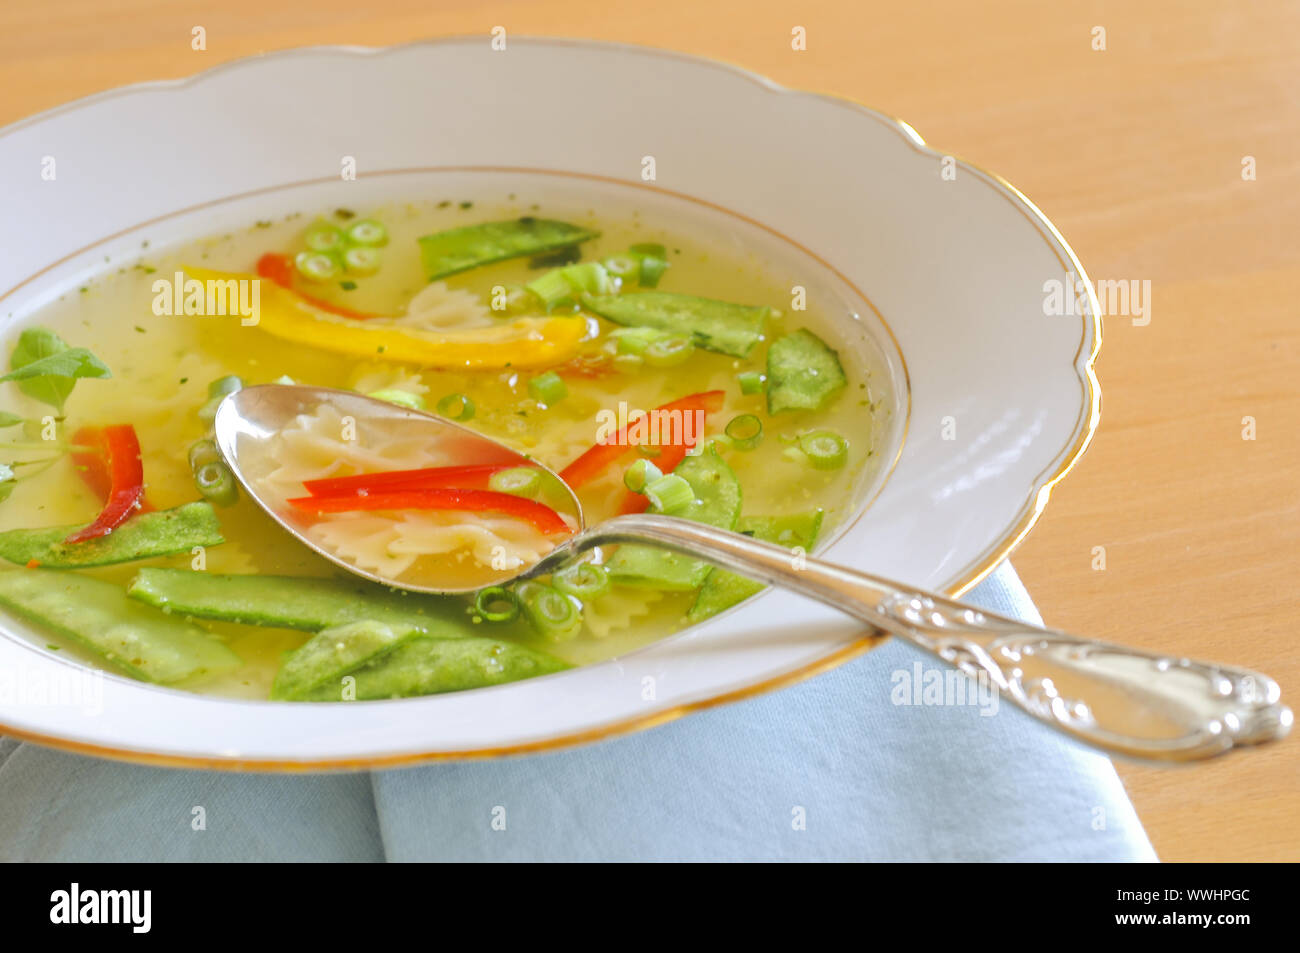 Vegetable soup with noodles Stock Photo